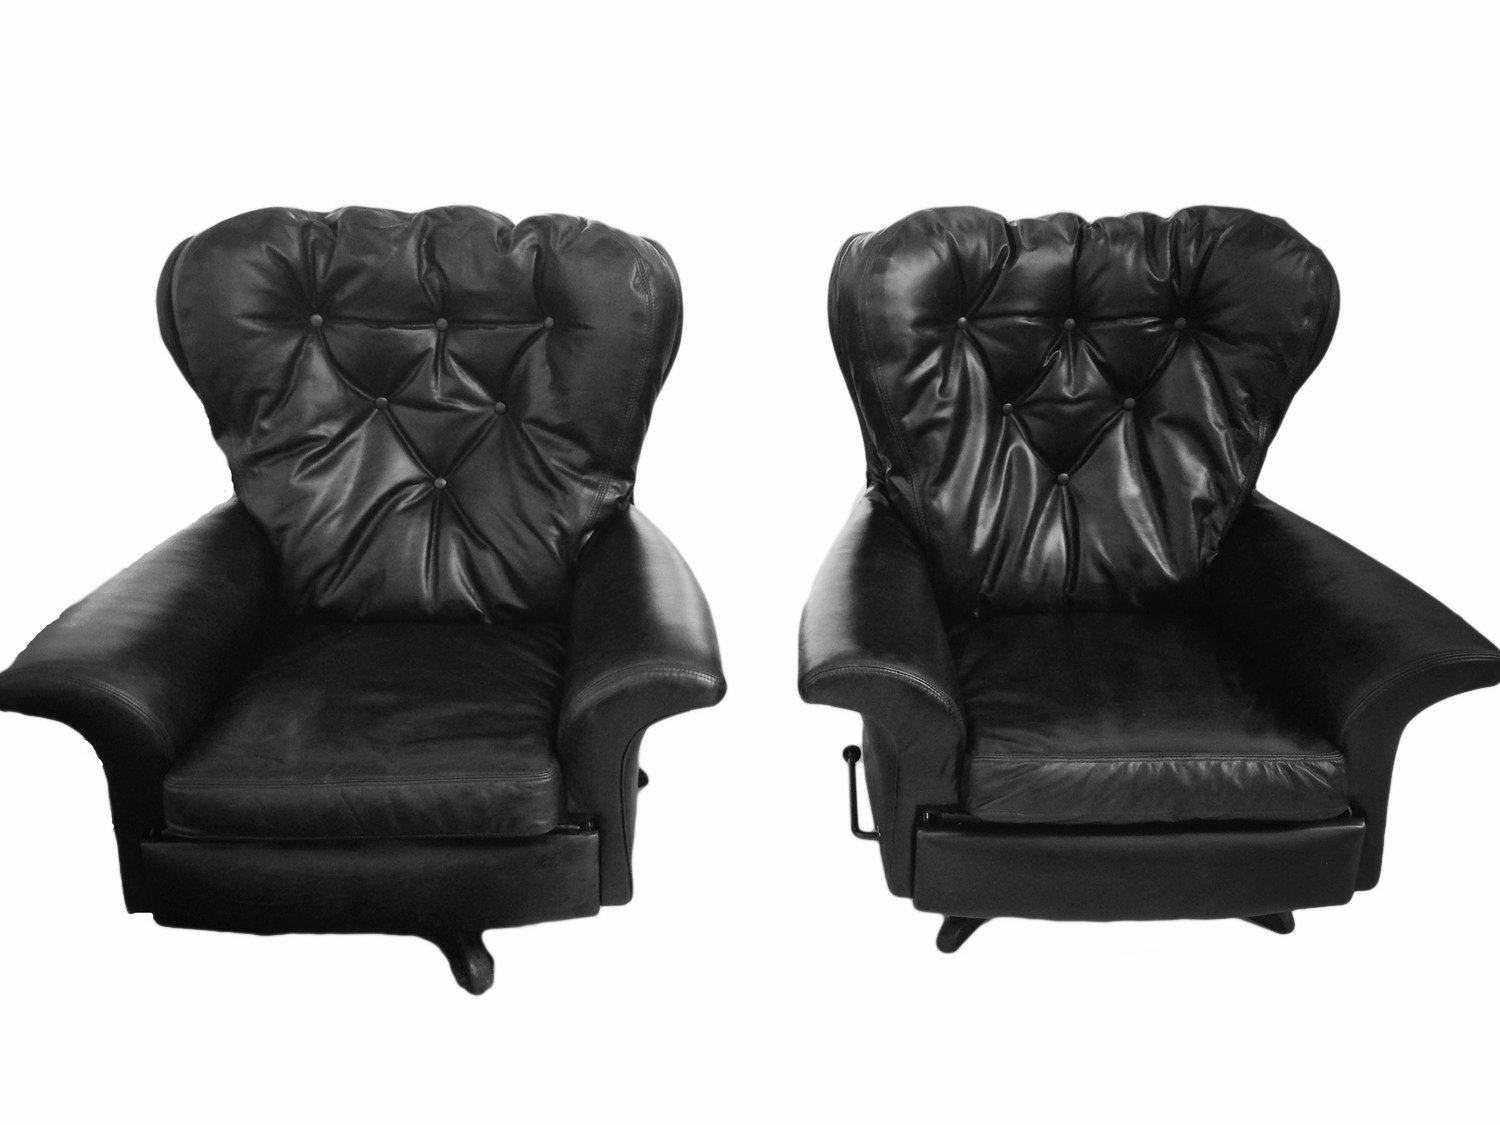 2 Leather Arm Chairs.jpg